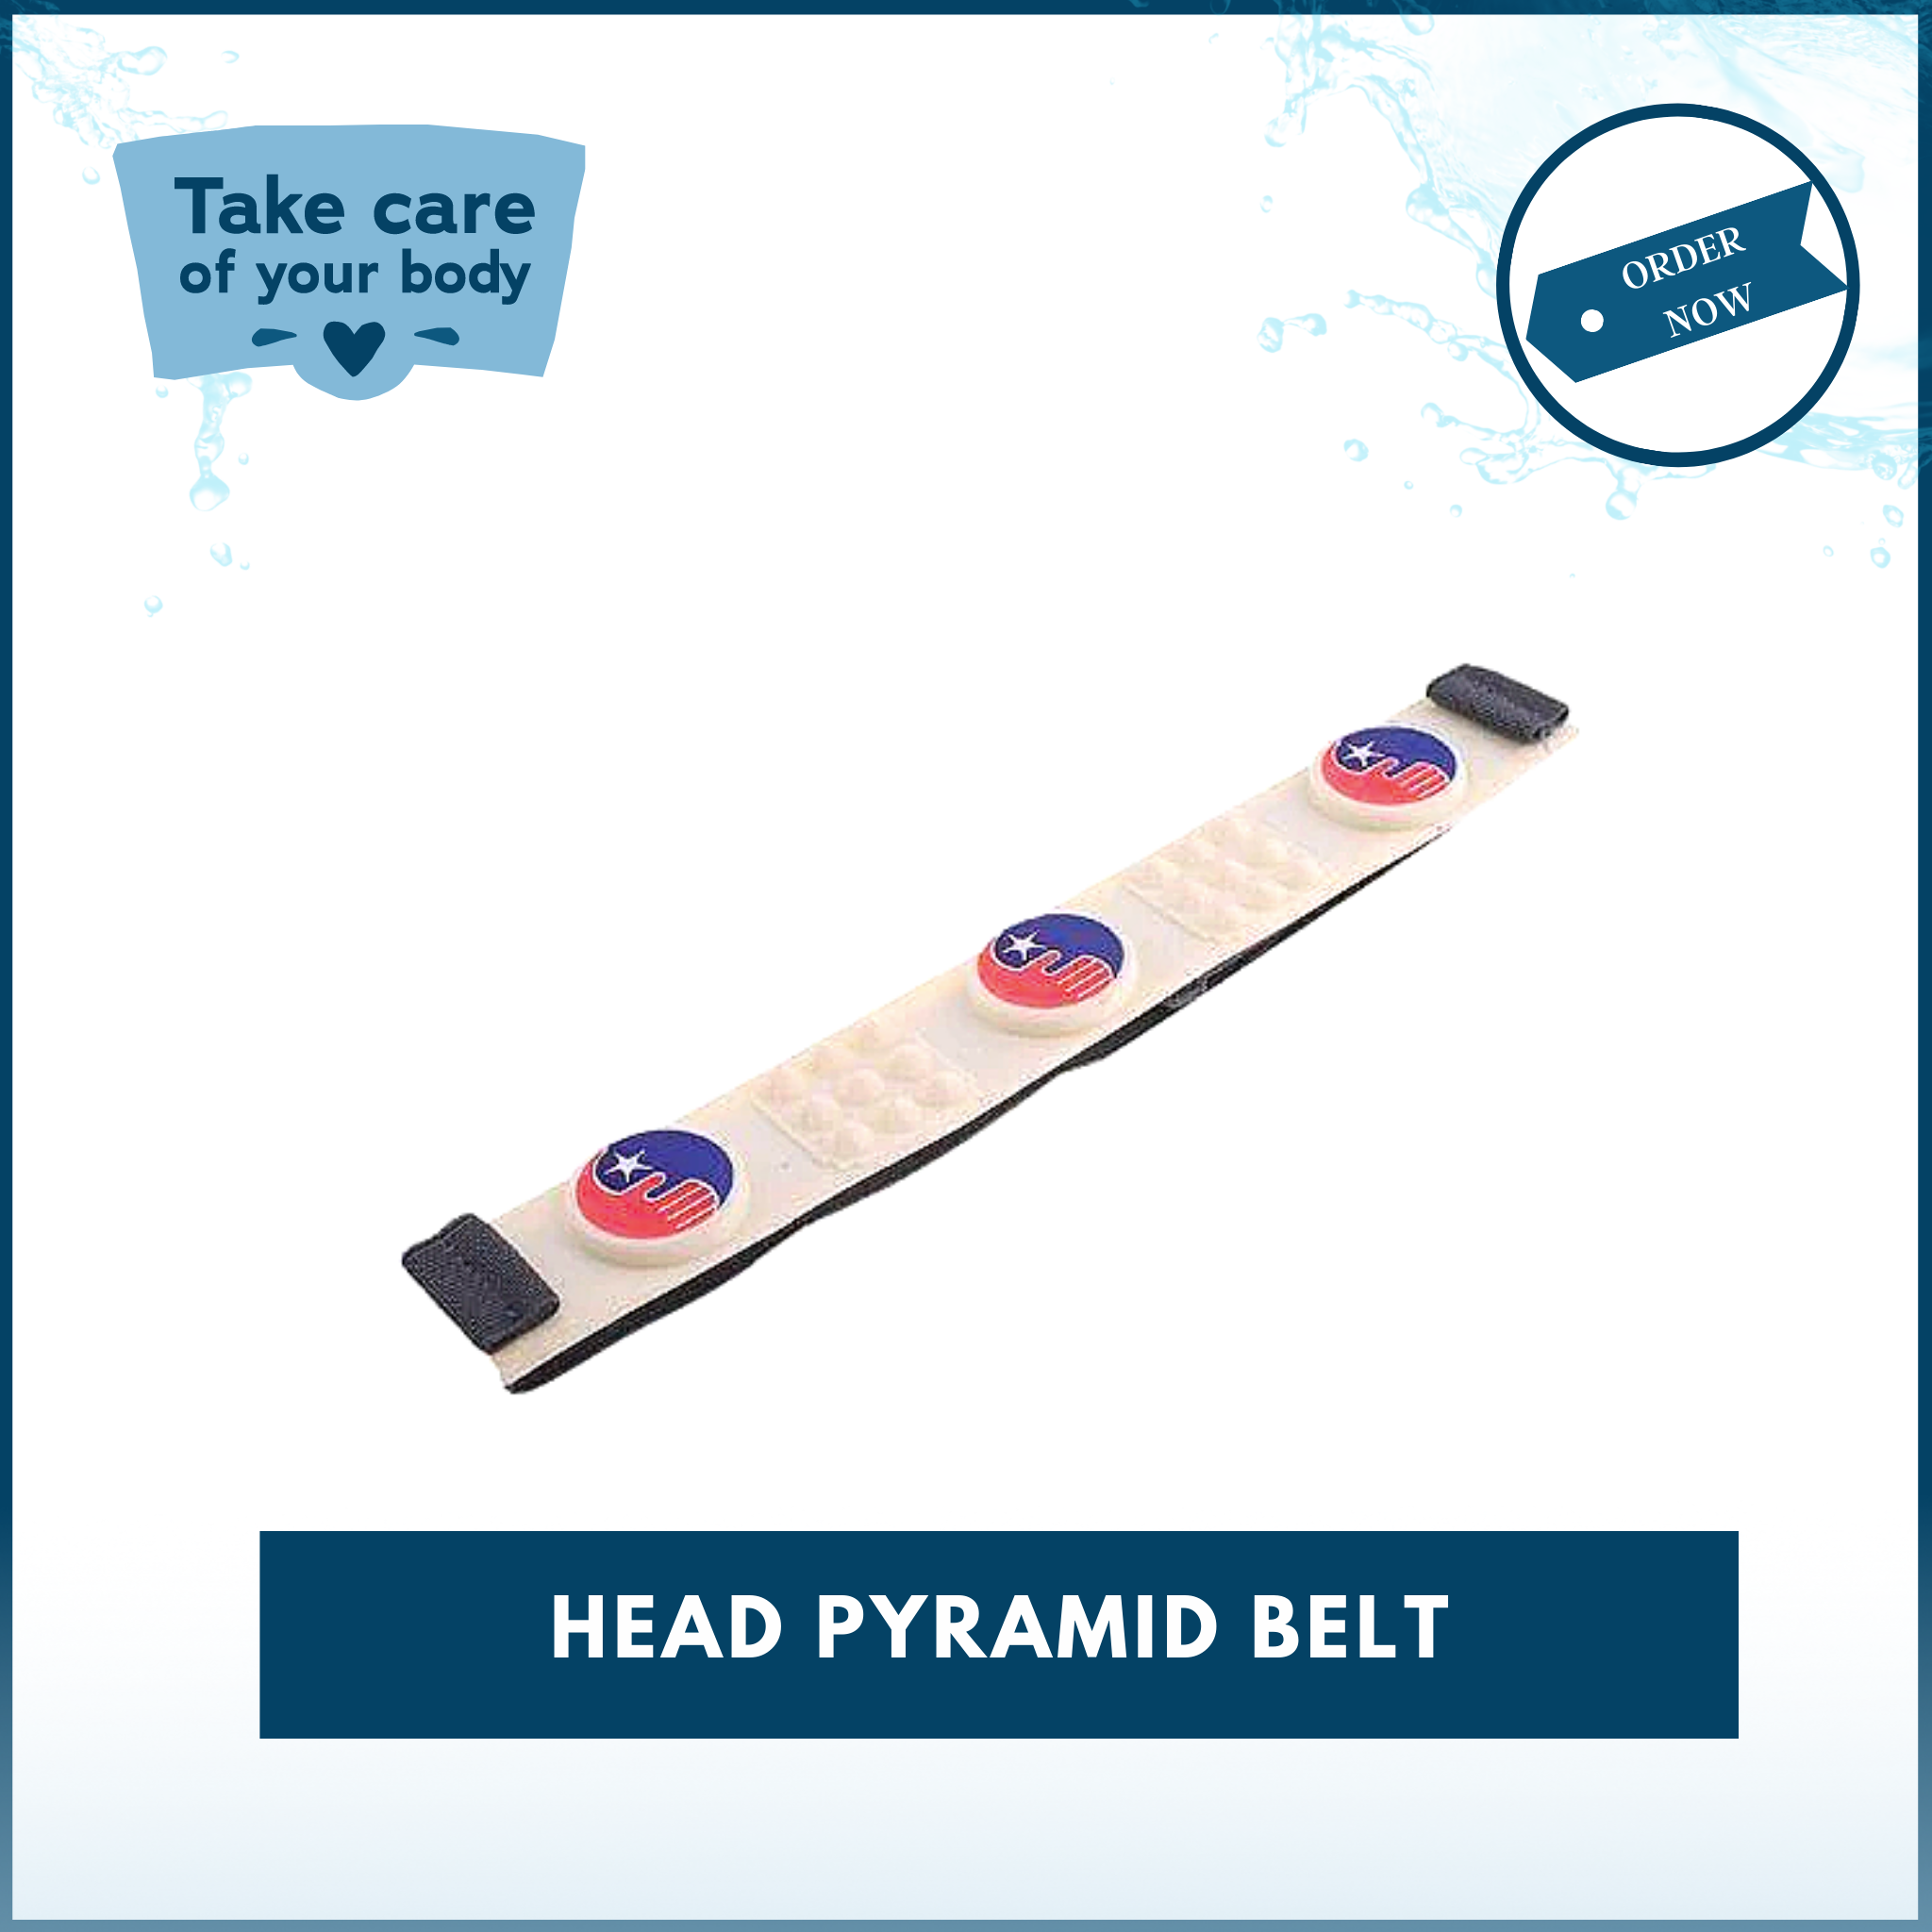 HealingCombo 1 - Eye Pyramid Multi Energy Eye Care + Head Belt With Copper Pyramid for Natural Eye & Head Healing & Relaxation